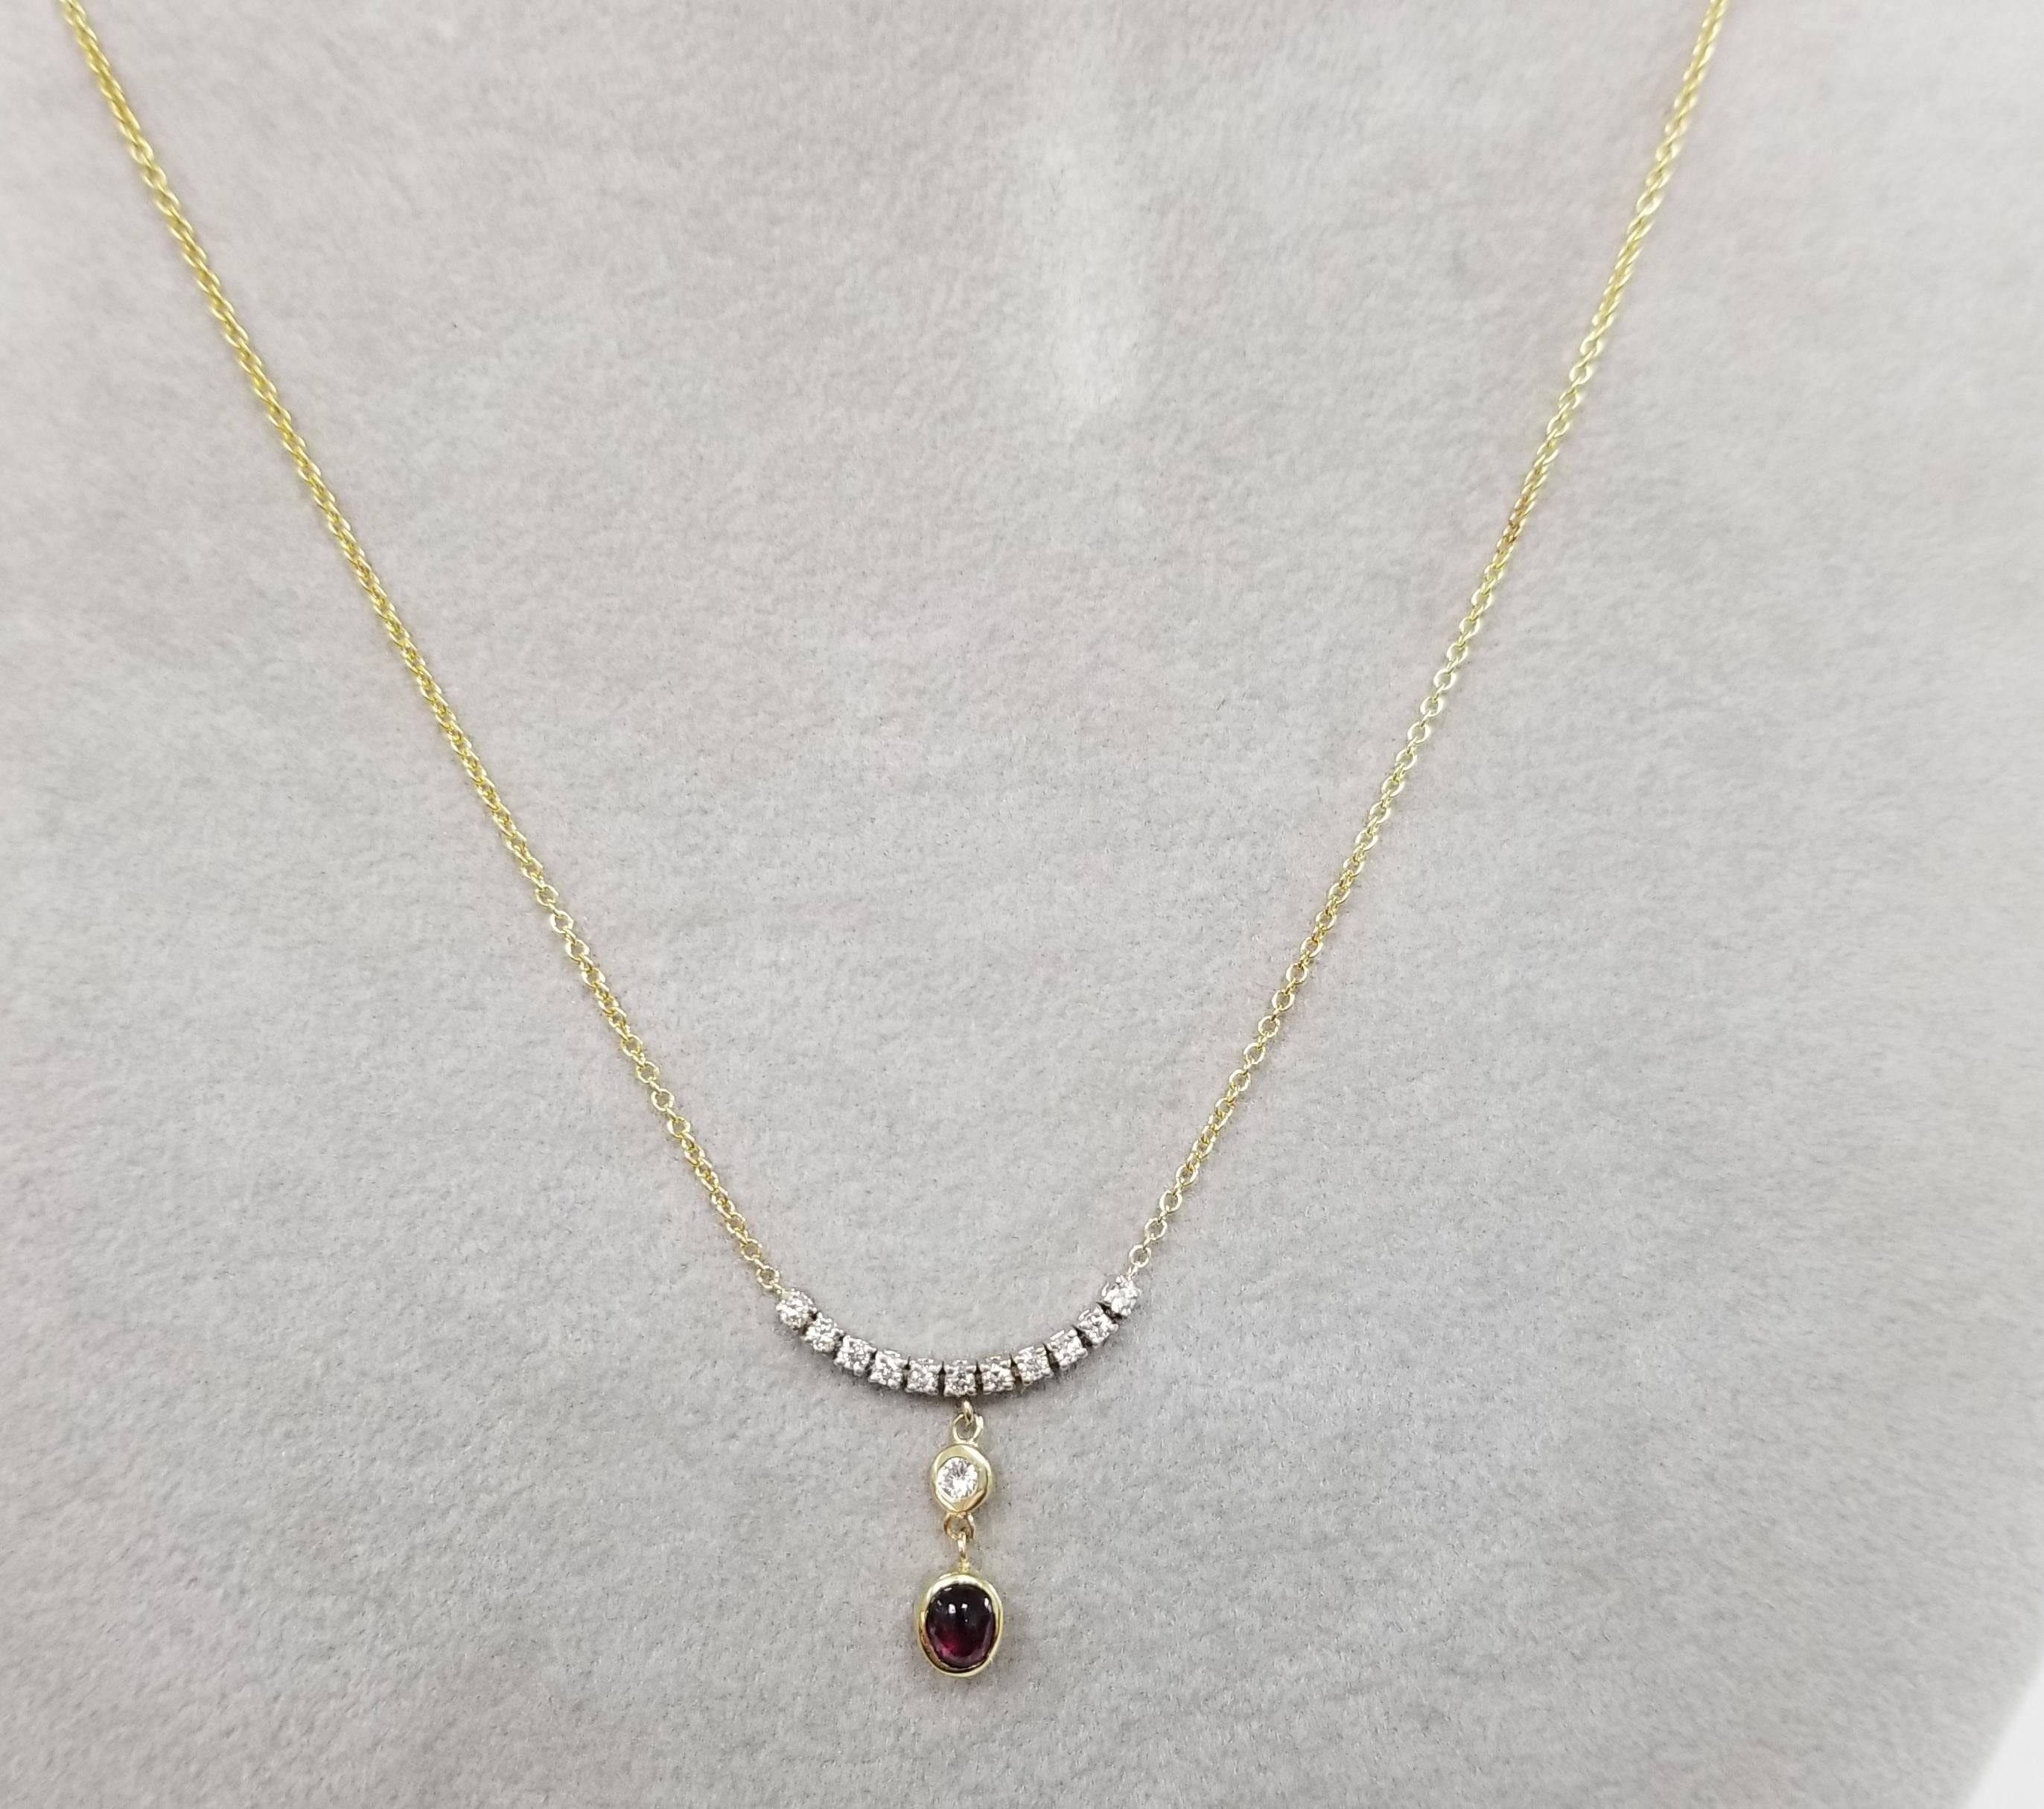 Surprise a special woman in your life with this large, breathtaking, statement ruby diamond necklace.This eye-catching pendant necklace features 0.25ct total weight of accent diamonds above a oval ruby, all set in 14K yellow gold.
Specifications:
  